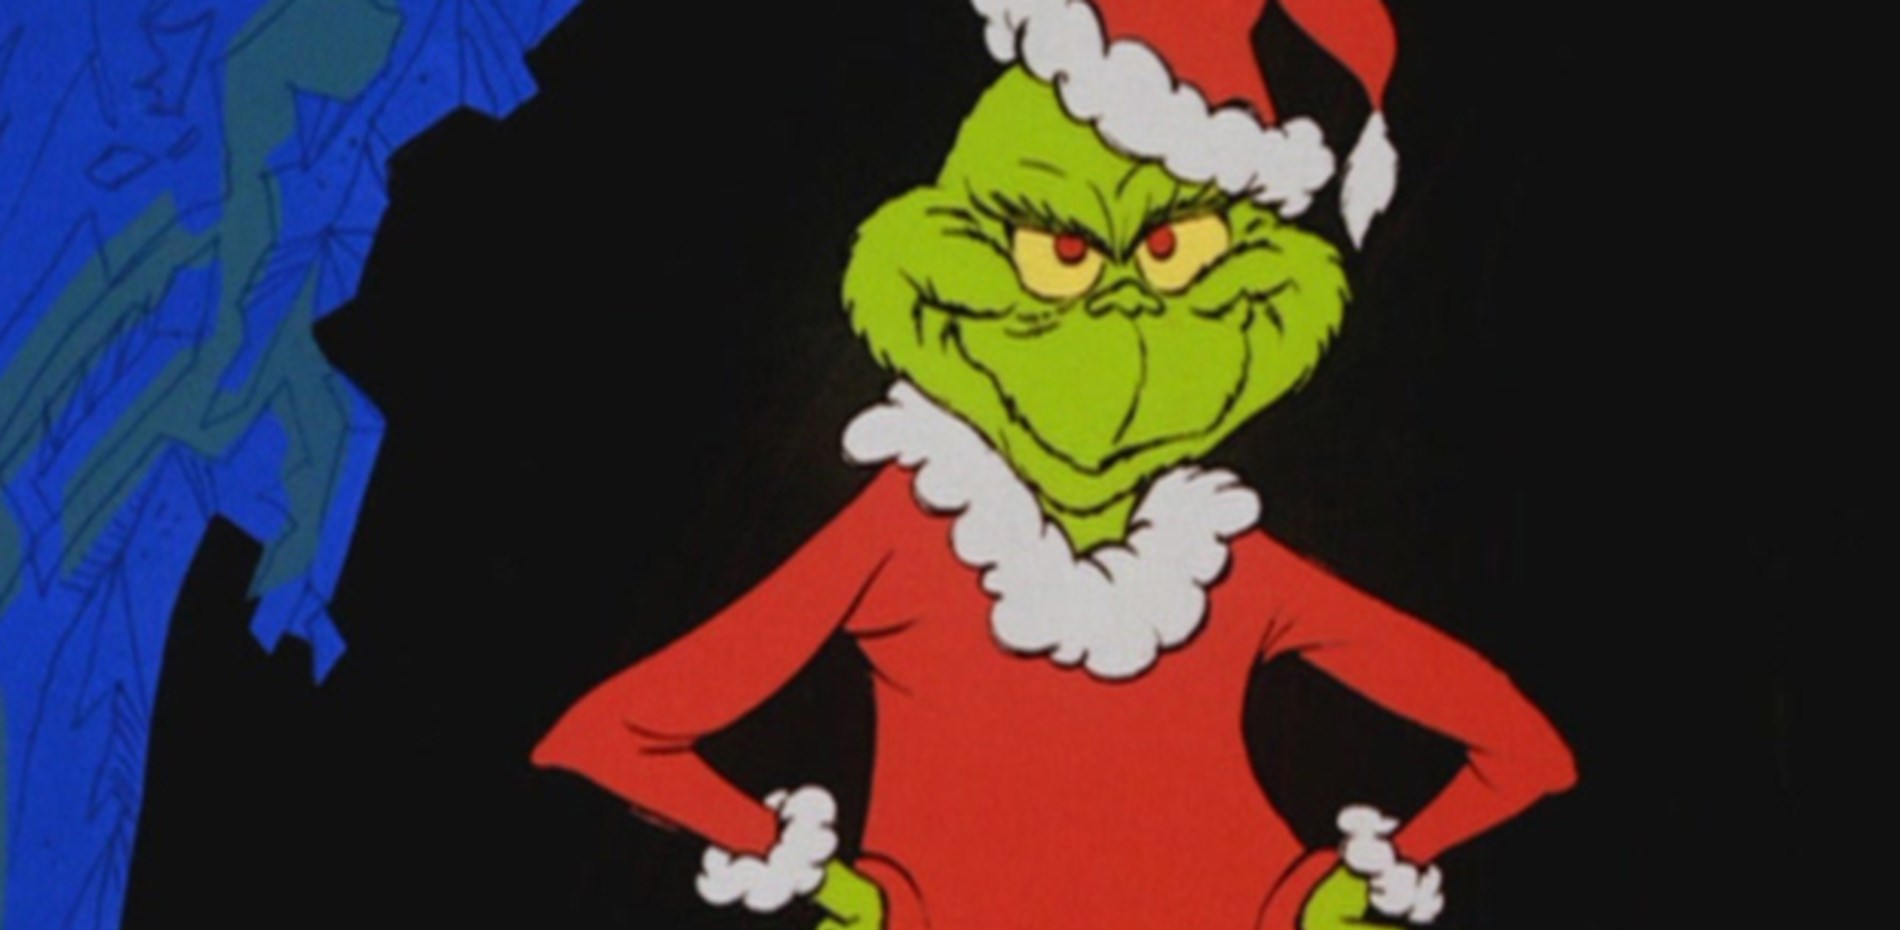 Media release: Minister is the Grinch that stole Christmas Main Image